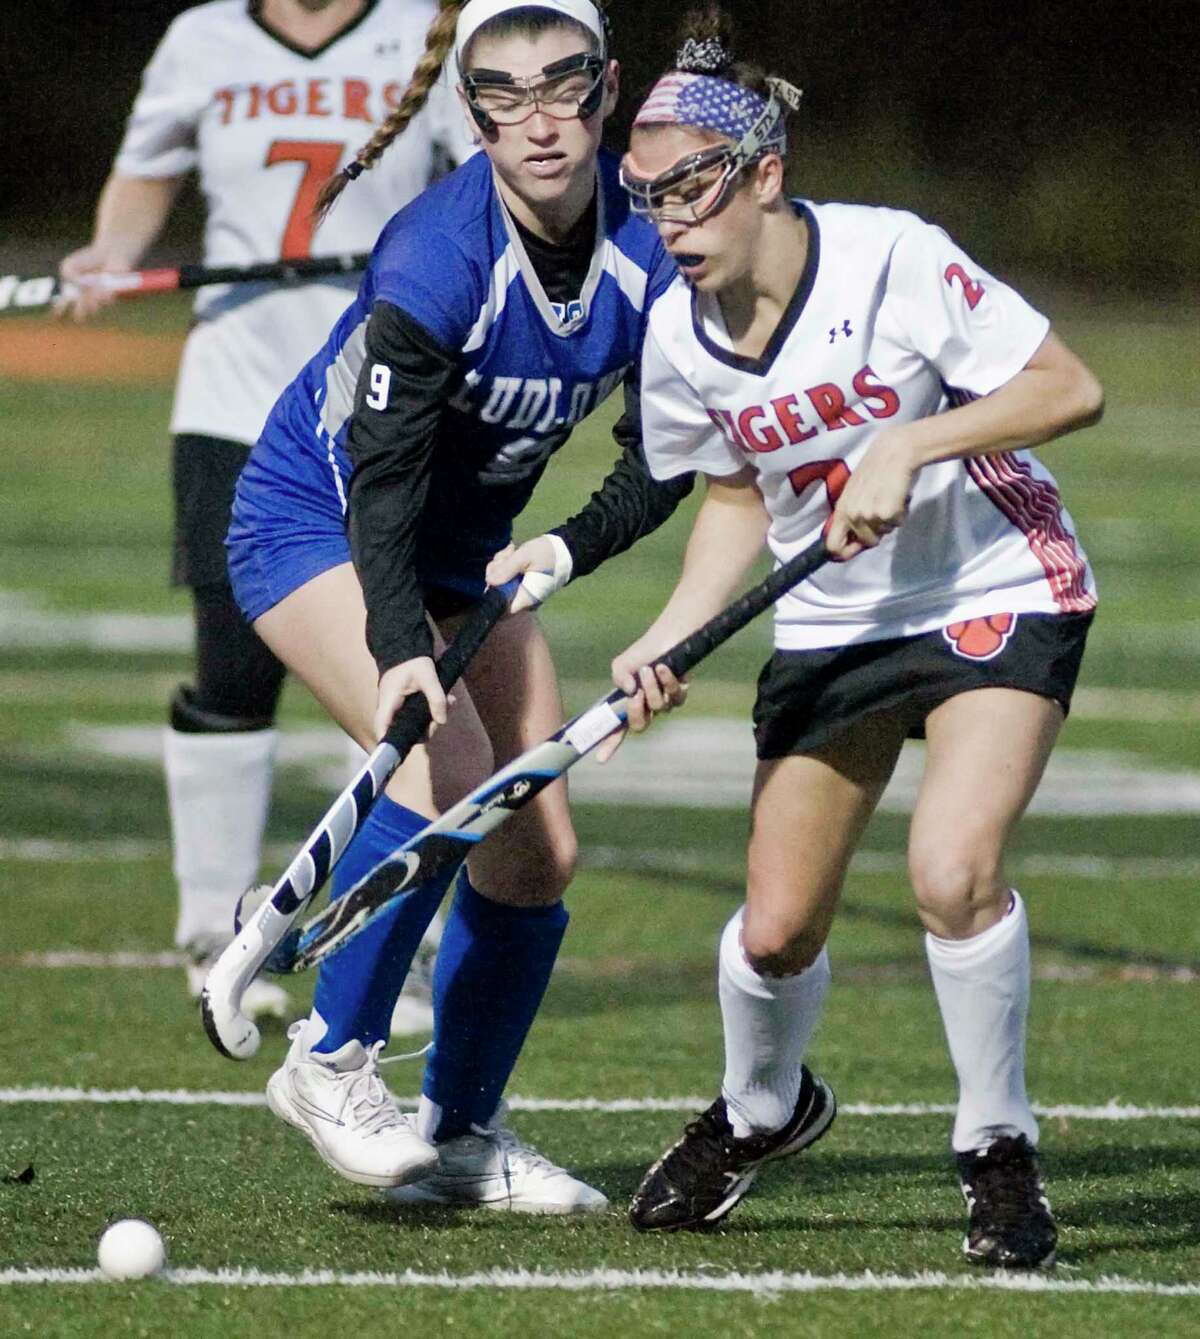 Julia Carrozza (right) and the Ridgefield field hockey team ended the regular season with a 13-1-0-2 record.